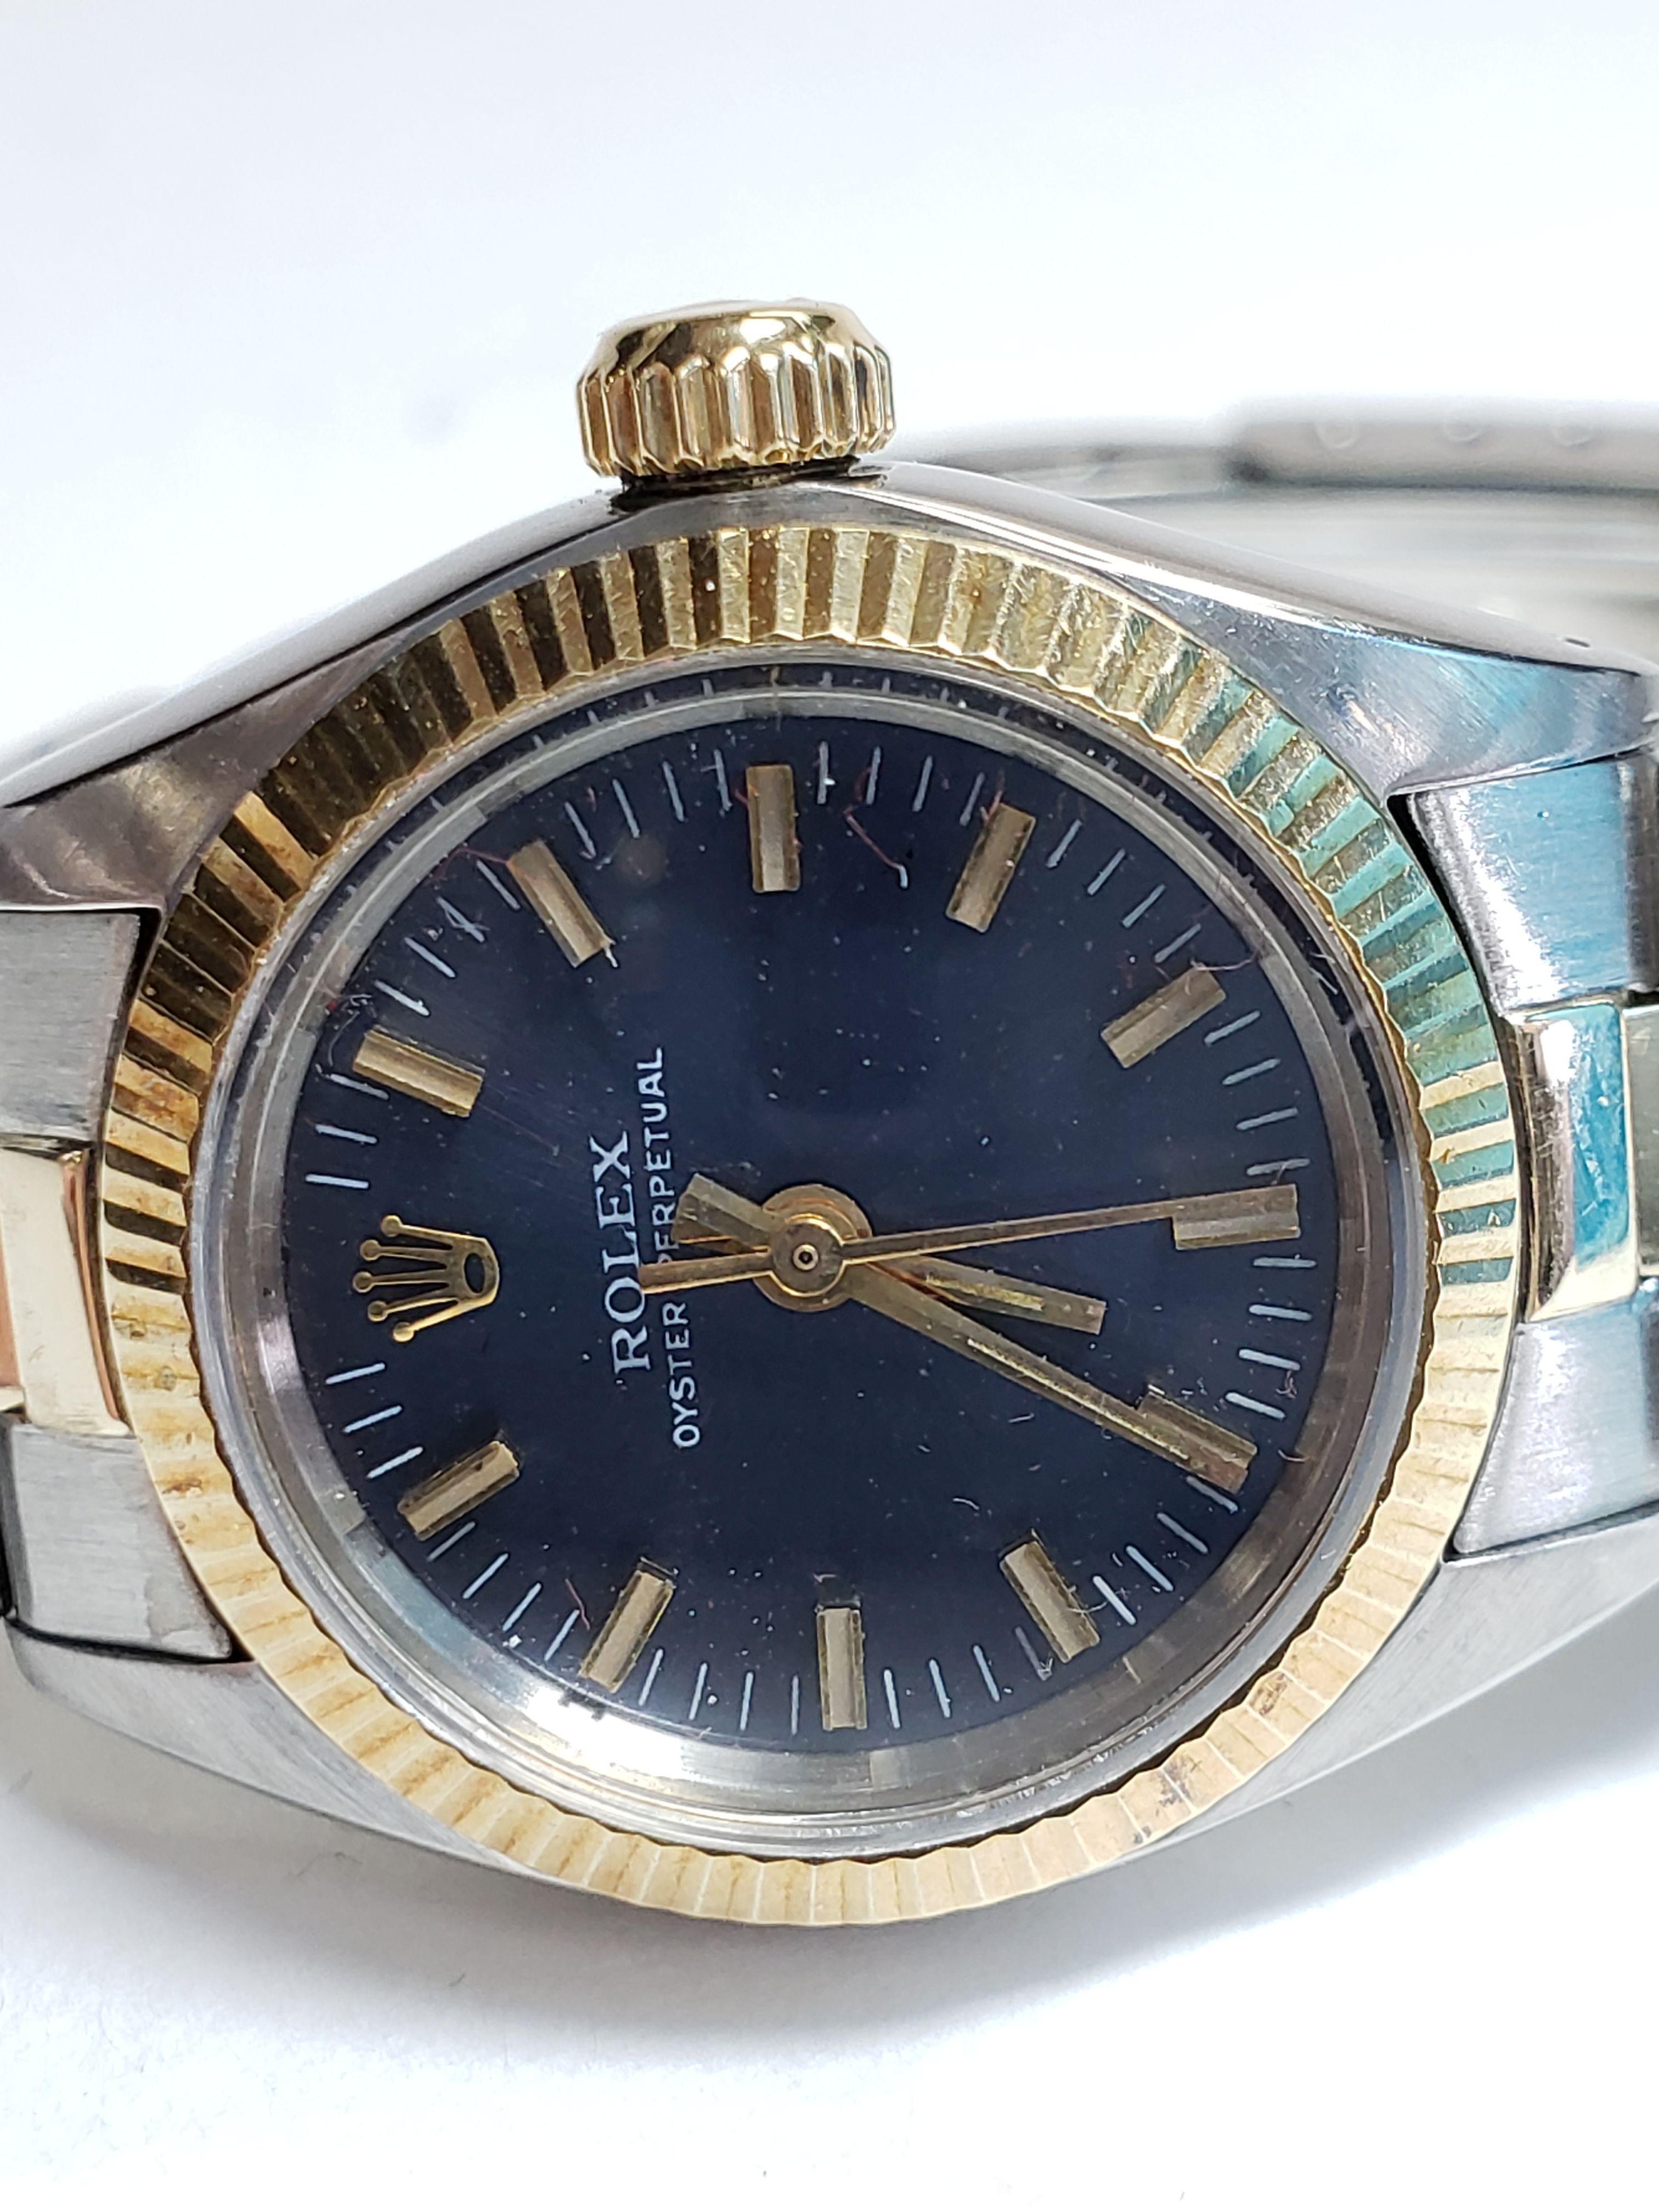 Womens Rolex Oyster Perpetual Two-Tone Automatic Watch with Box